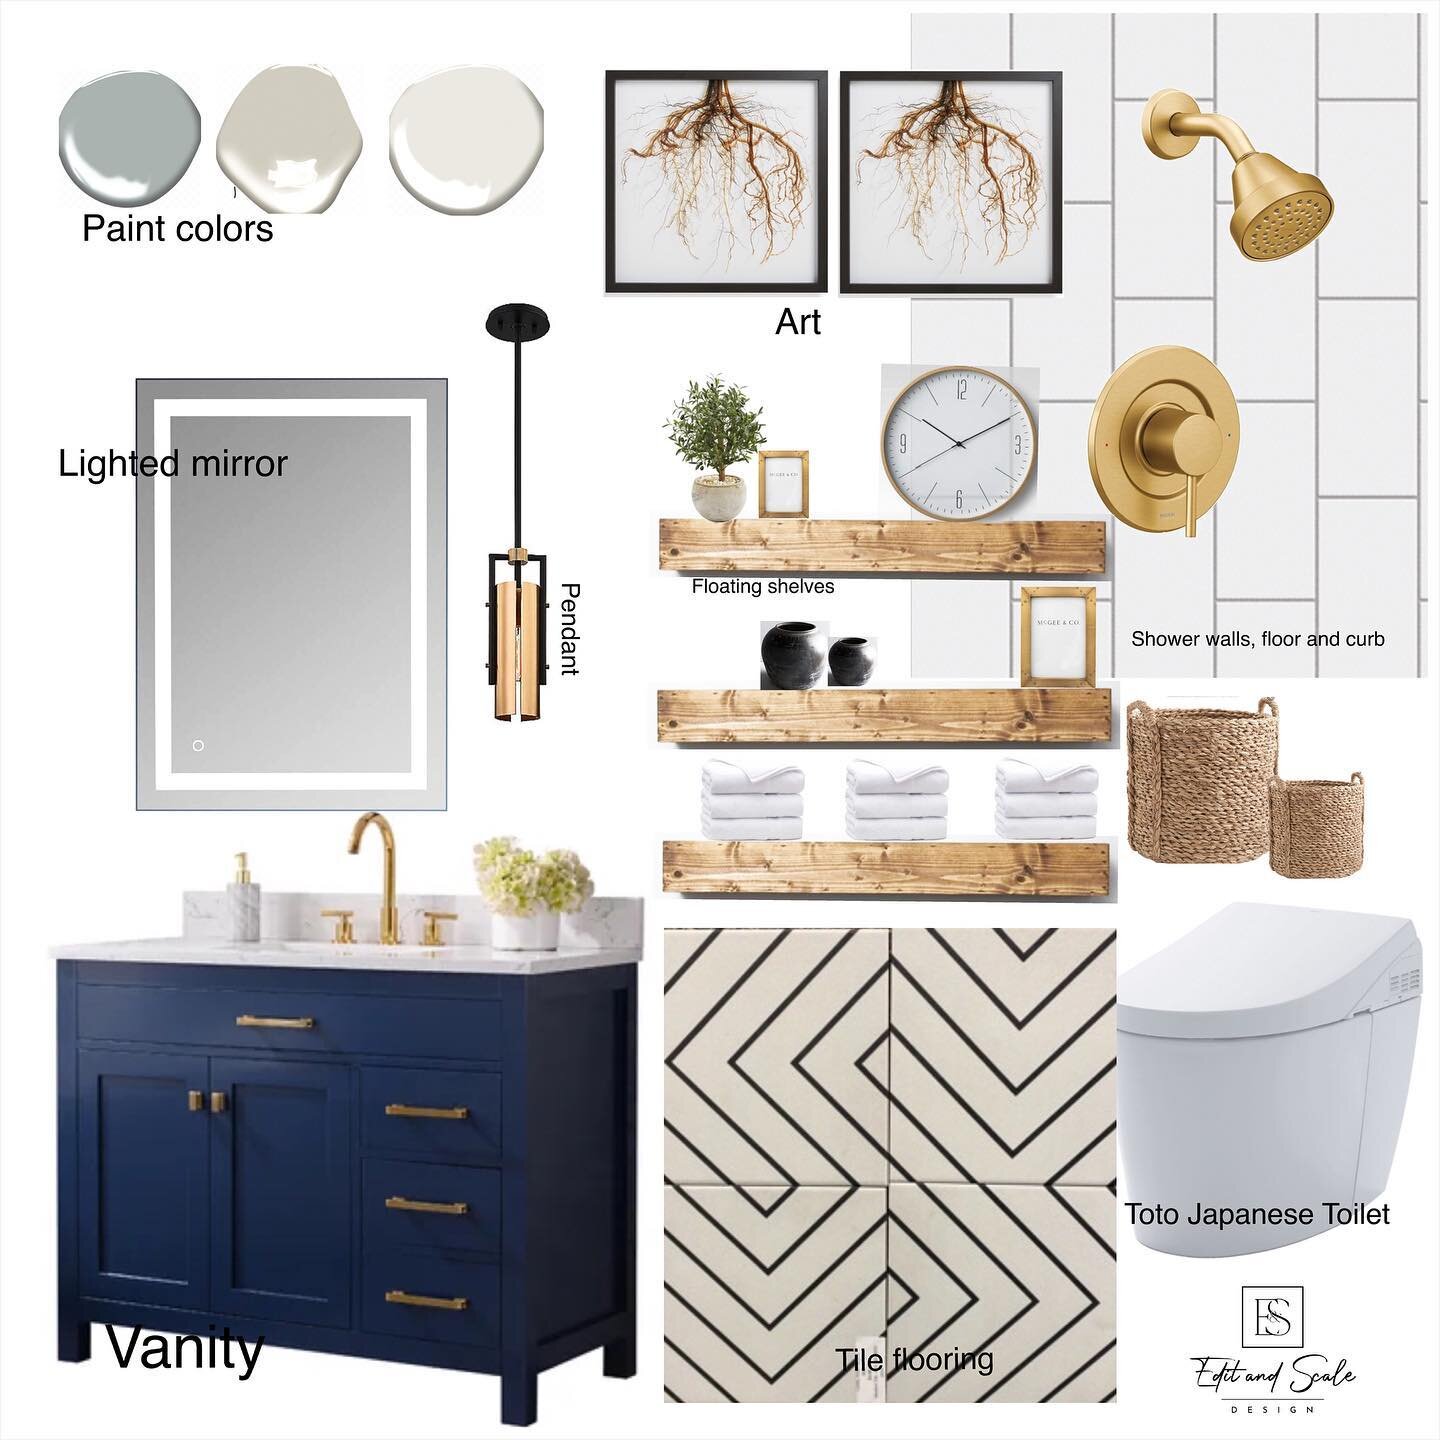 I&rsquo;m spending Valentine&rsquo;s being in love with this guest bath!  The clients are so fun and love a modern classic style, and it&rsquo;s going to be beautiful. They were adamant about a Japanese toilet and bidet, and I think it&rsquo;s a rad 